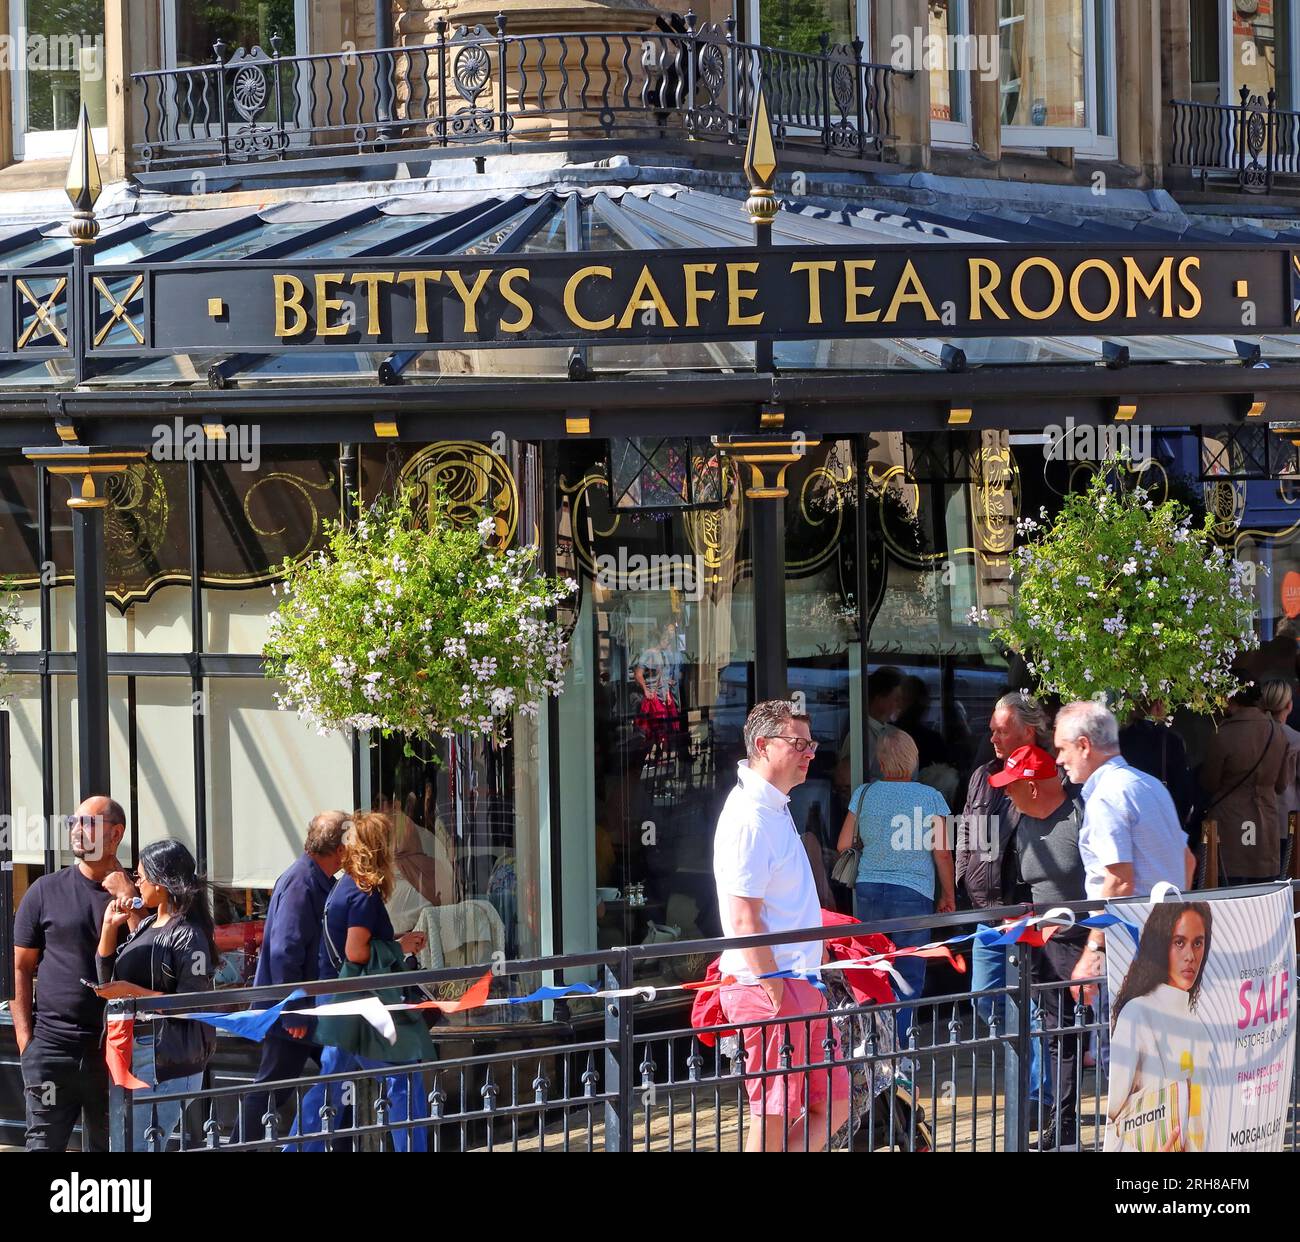 Bettys Cafe Tea Rooms cafe and shop, Montpellier Parade / 1 Parliament St, Harrogate, North Yorkshire, England, UK , HG1 2QU Stock Photo